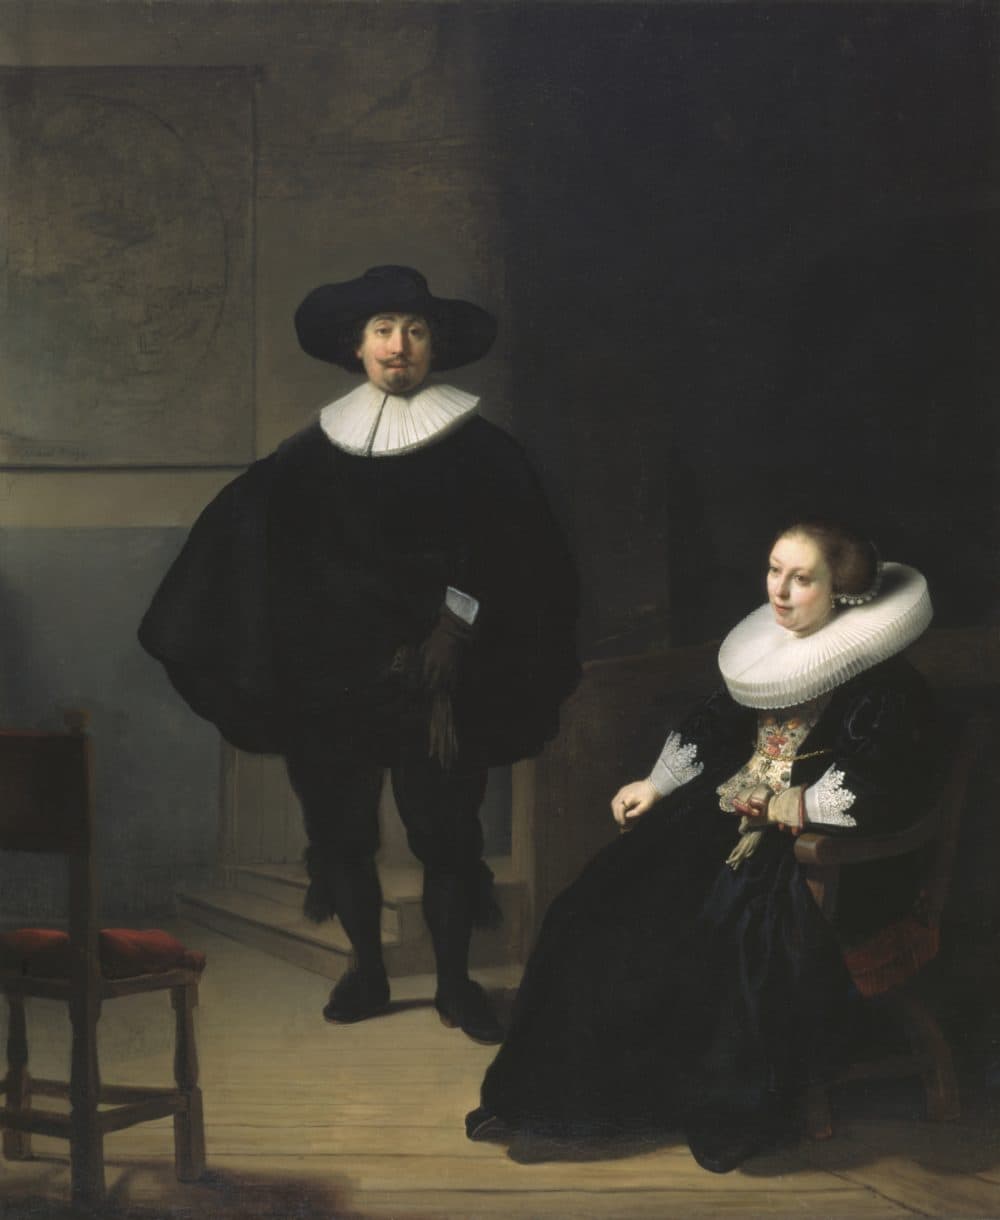 Rembrandt van Rijn's &quot;A Lady And Gentleman In Black,&quot; painted in 1633. Oil on canvas, 131.6 x 109 cm (51 13/16 x 42 15/16 in.) (Courtesy Isabella Stewart Gardner Museum)